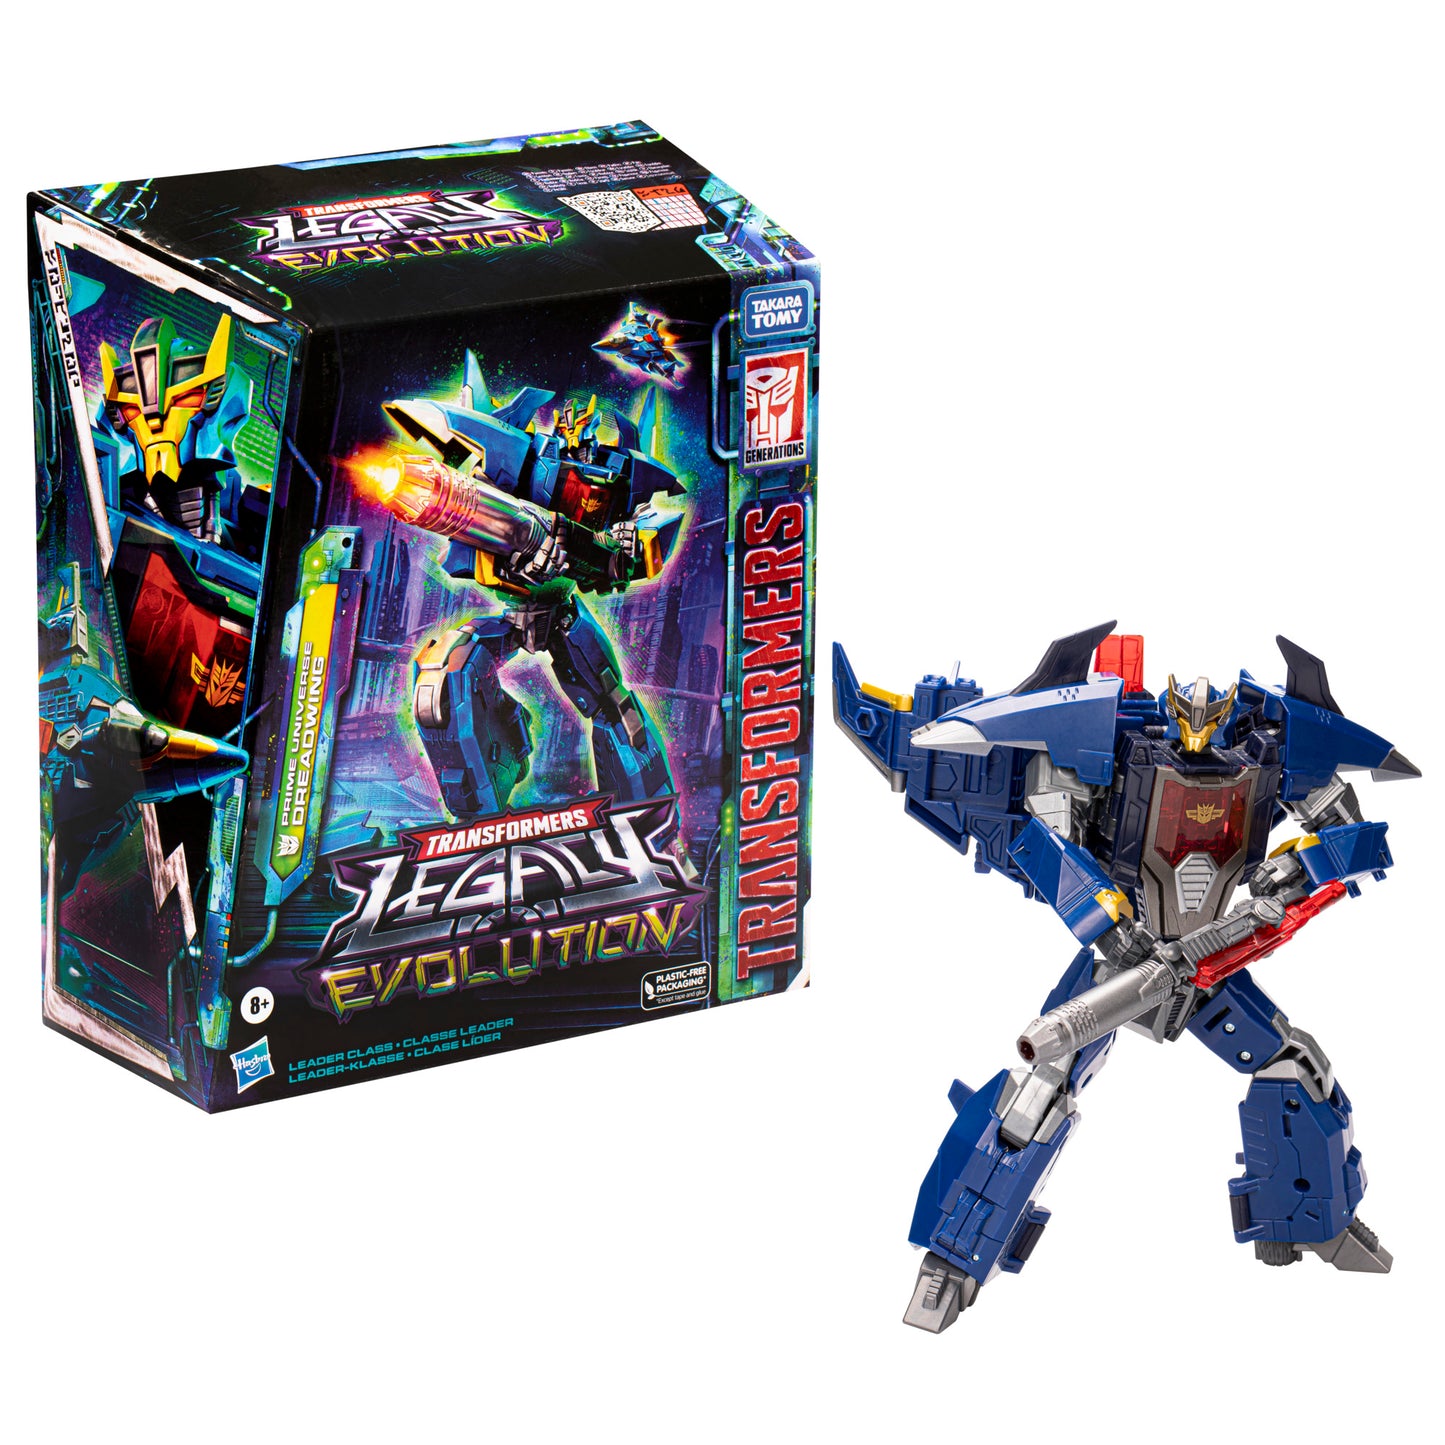 Transformers Legacy Evolution Leader Class Prime Universe Dreadwing Action Figure Toy